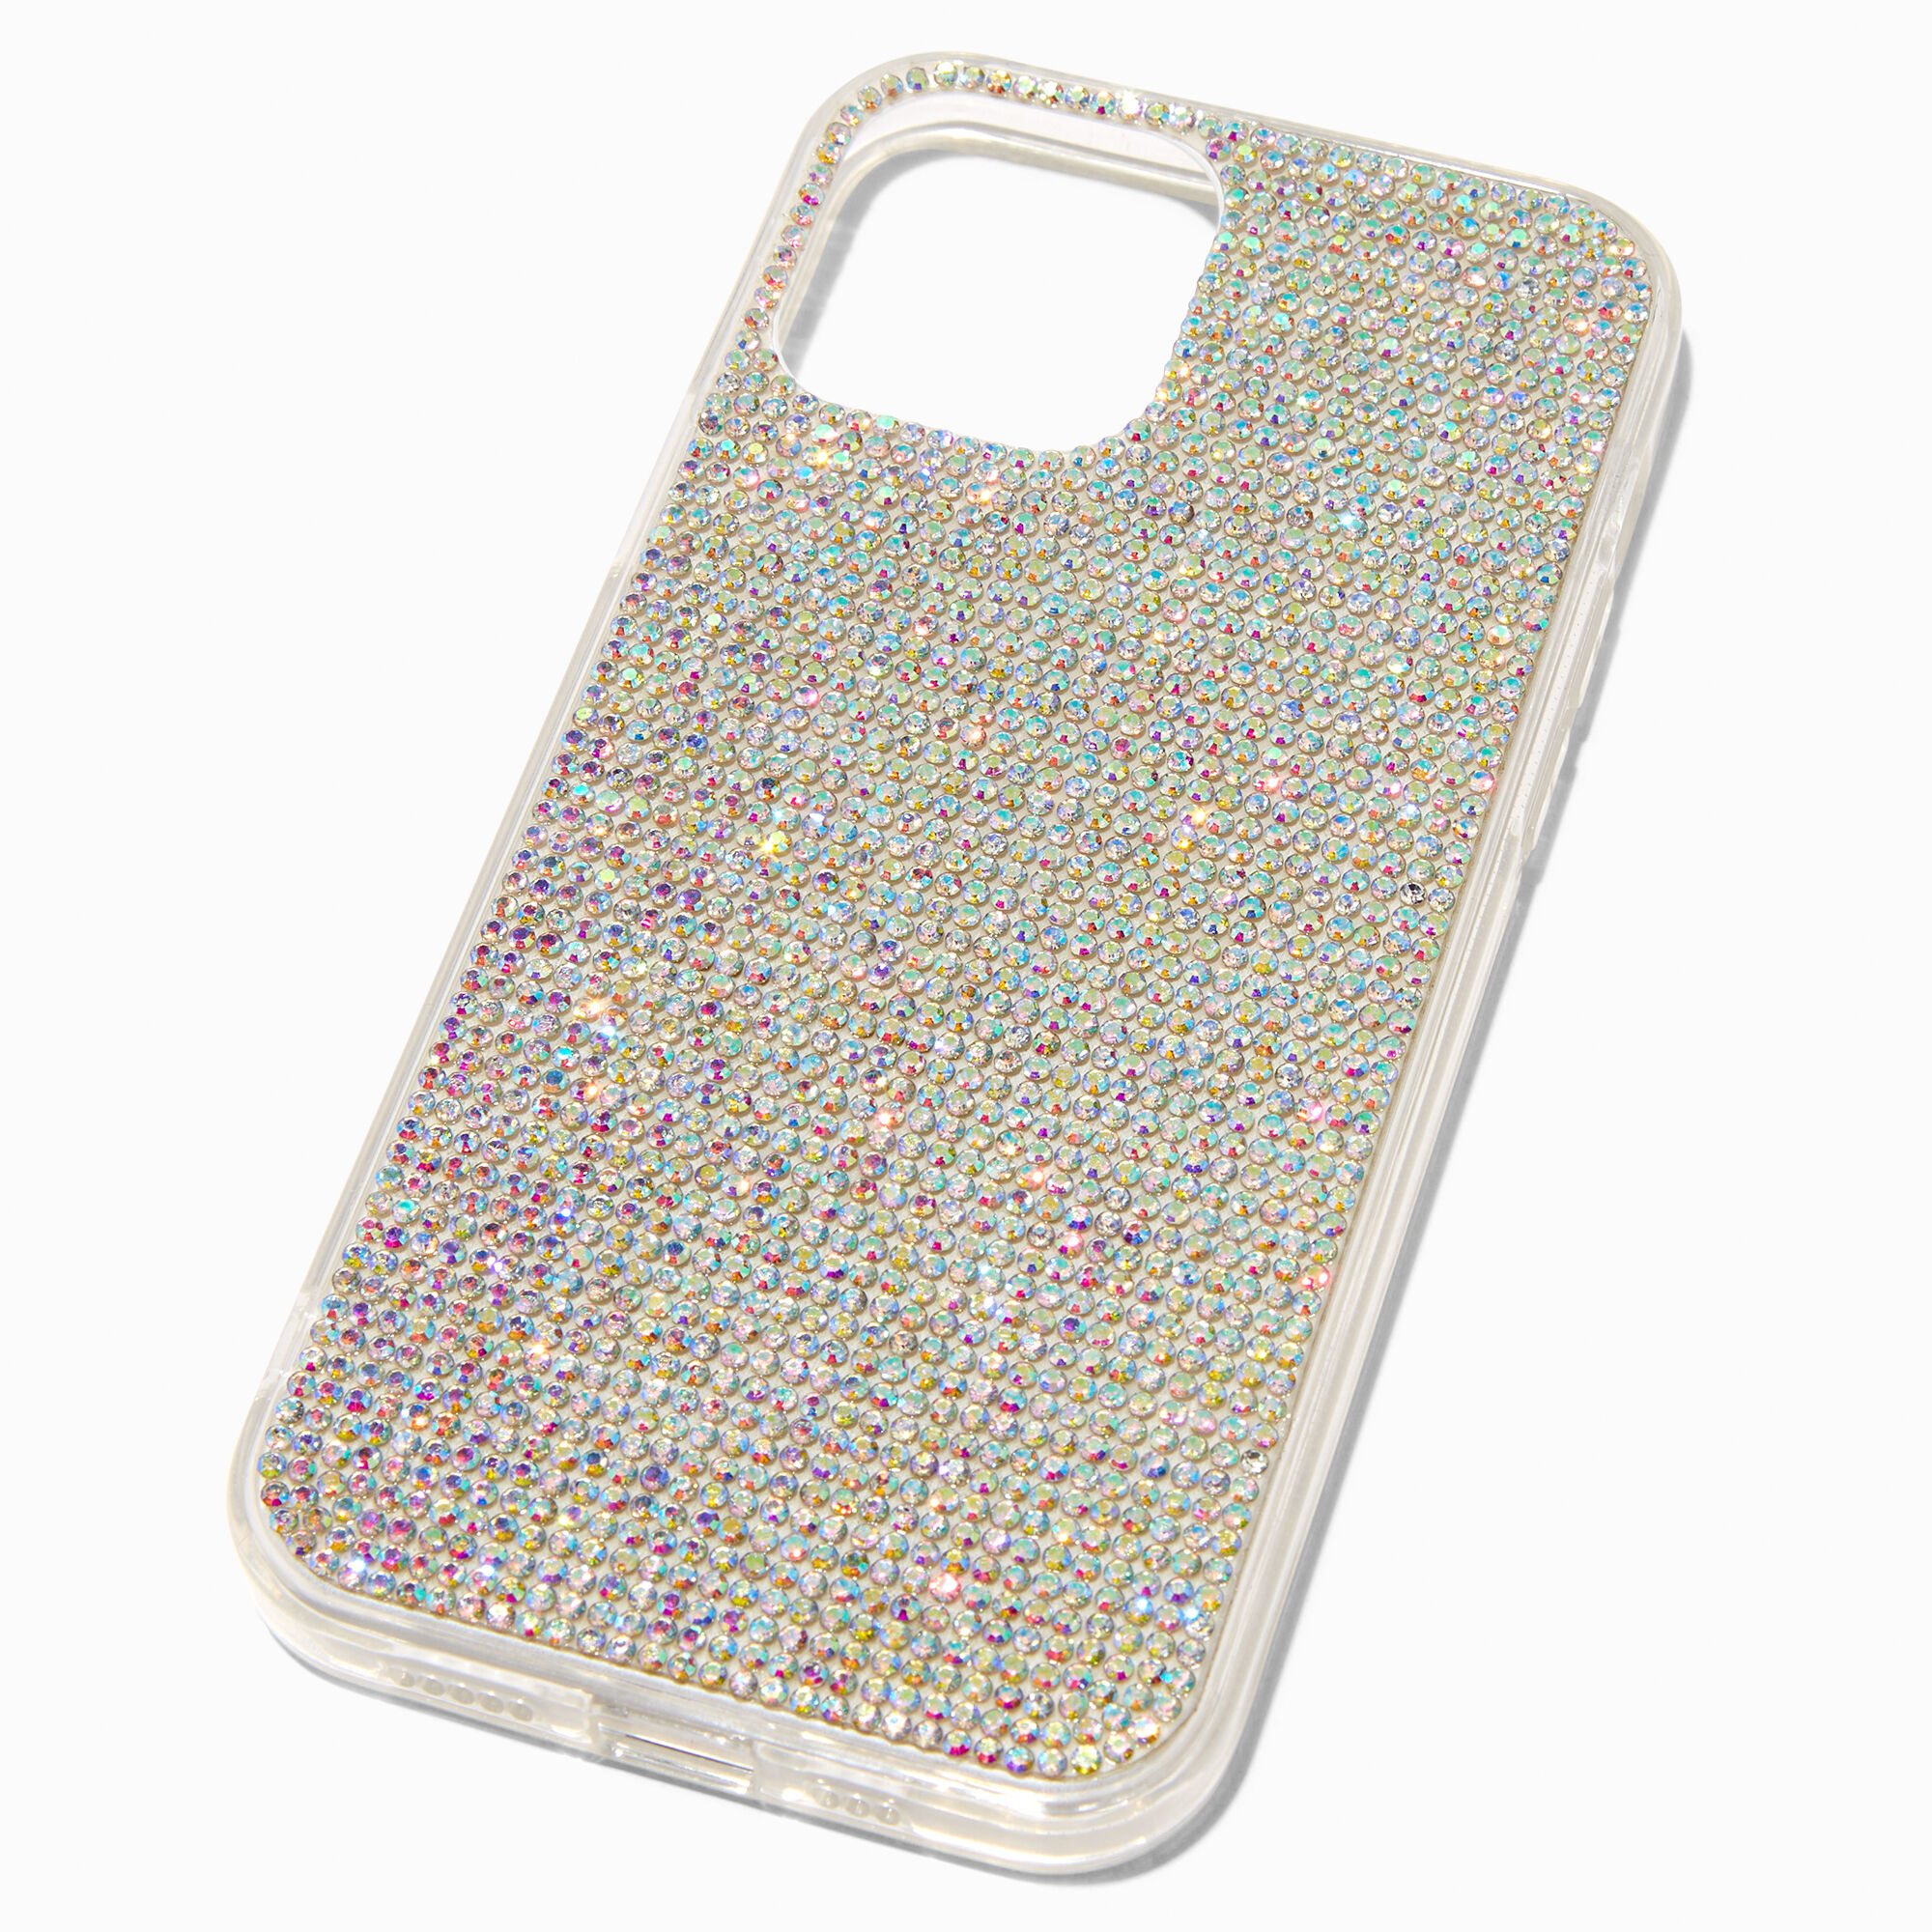 View Claires Paved Crystal Protective Phone Case Fits Iphone 12 Pro information